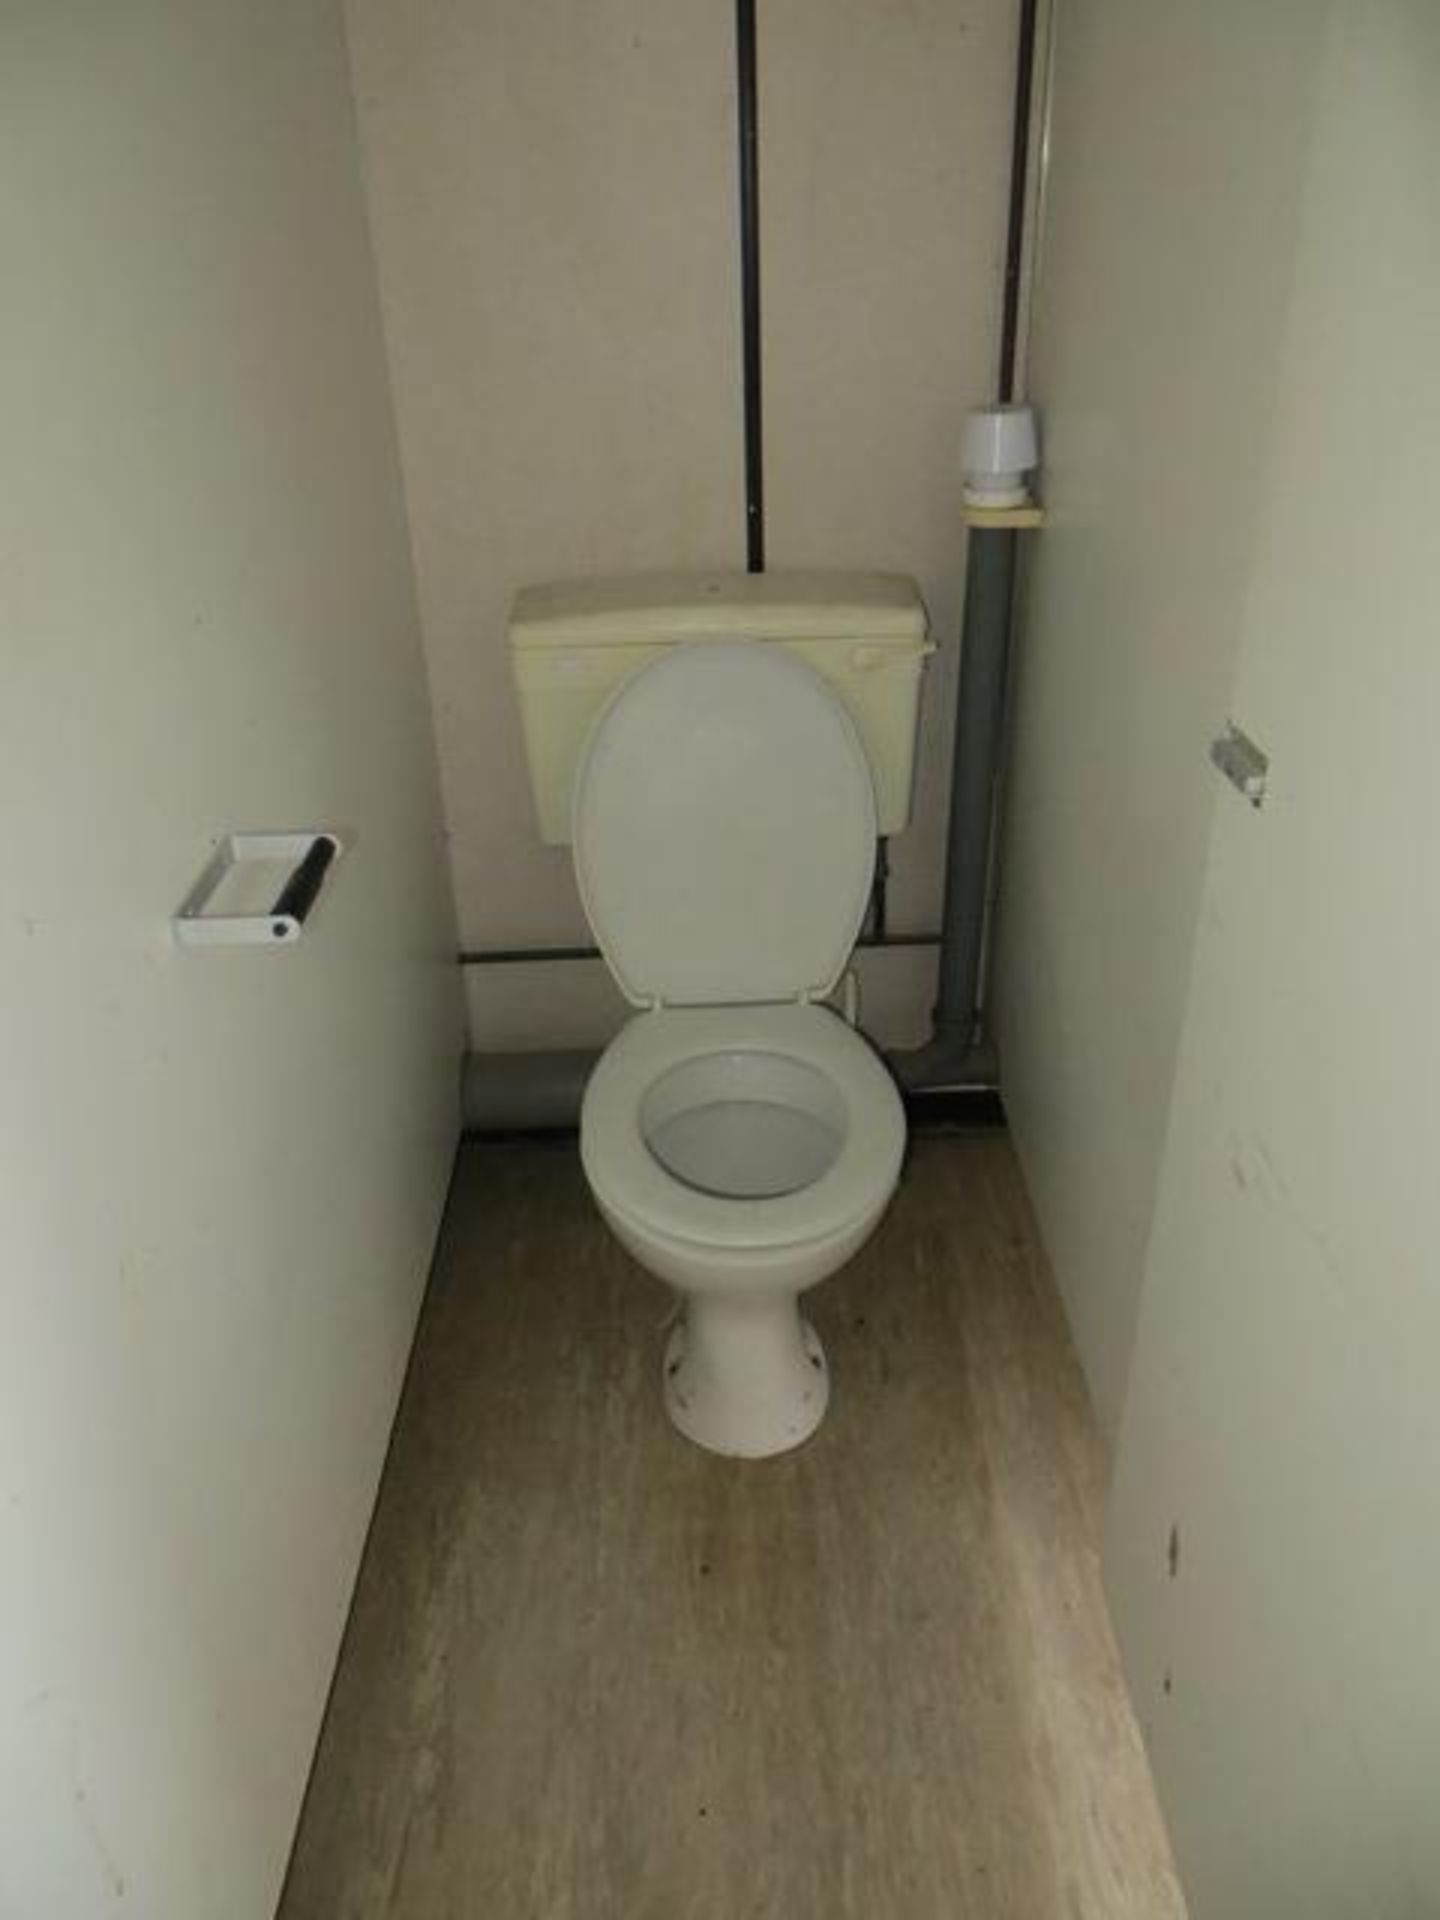 13' x 9' Steel Container Split WC 2 Cubicles & 2 Urinals c/w Separate Ladies Toilet Cubicle - Image 6 of 7